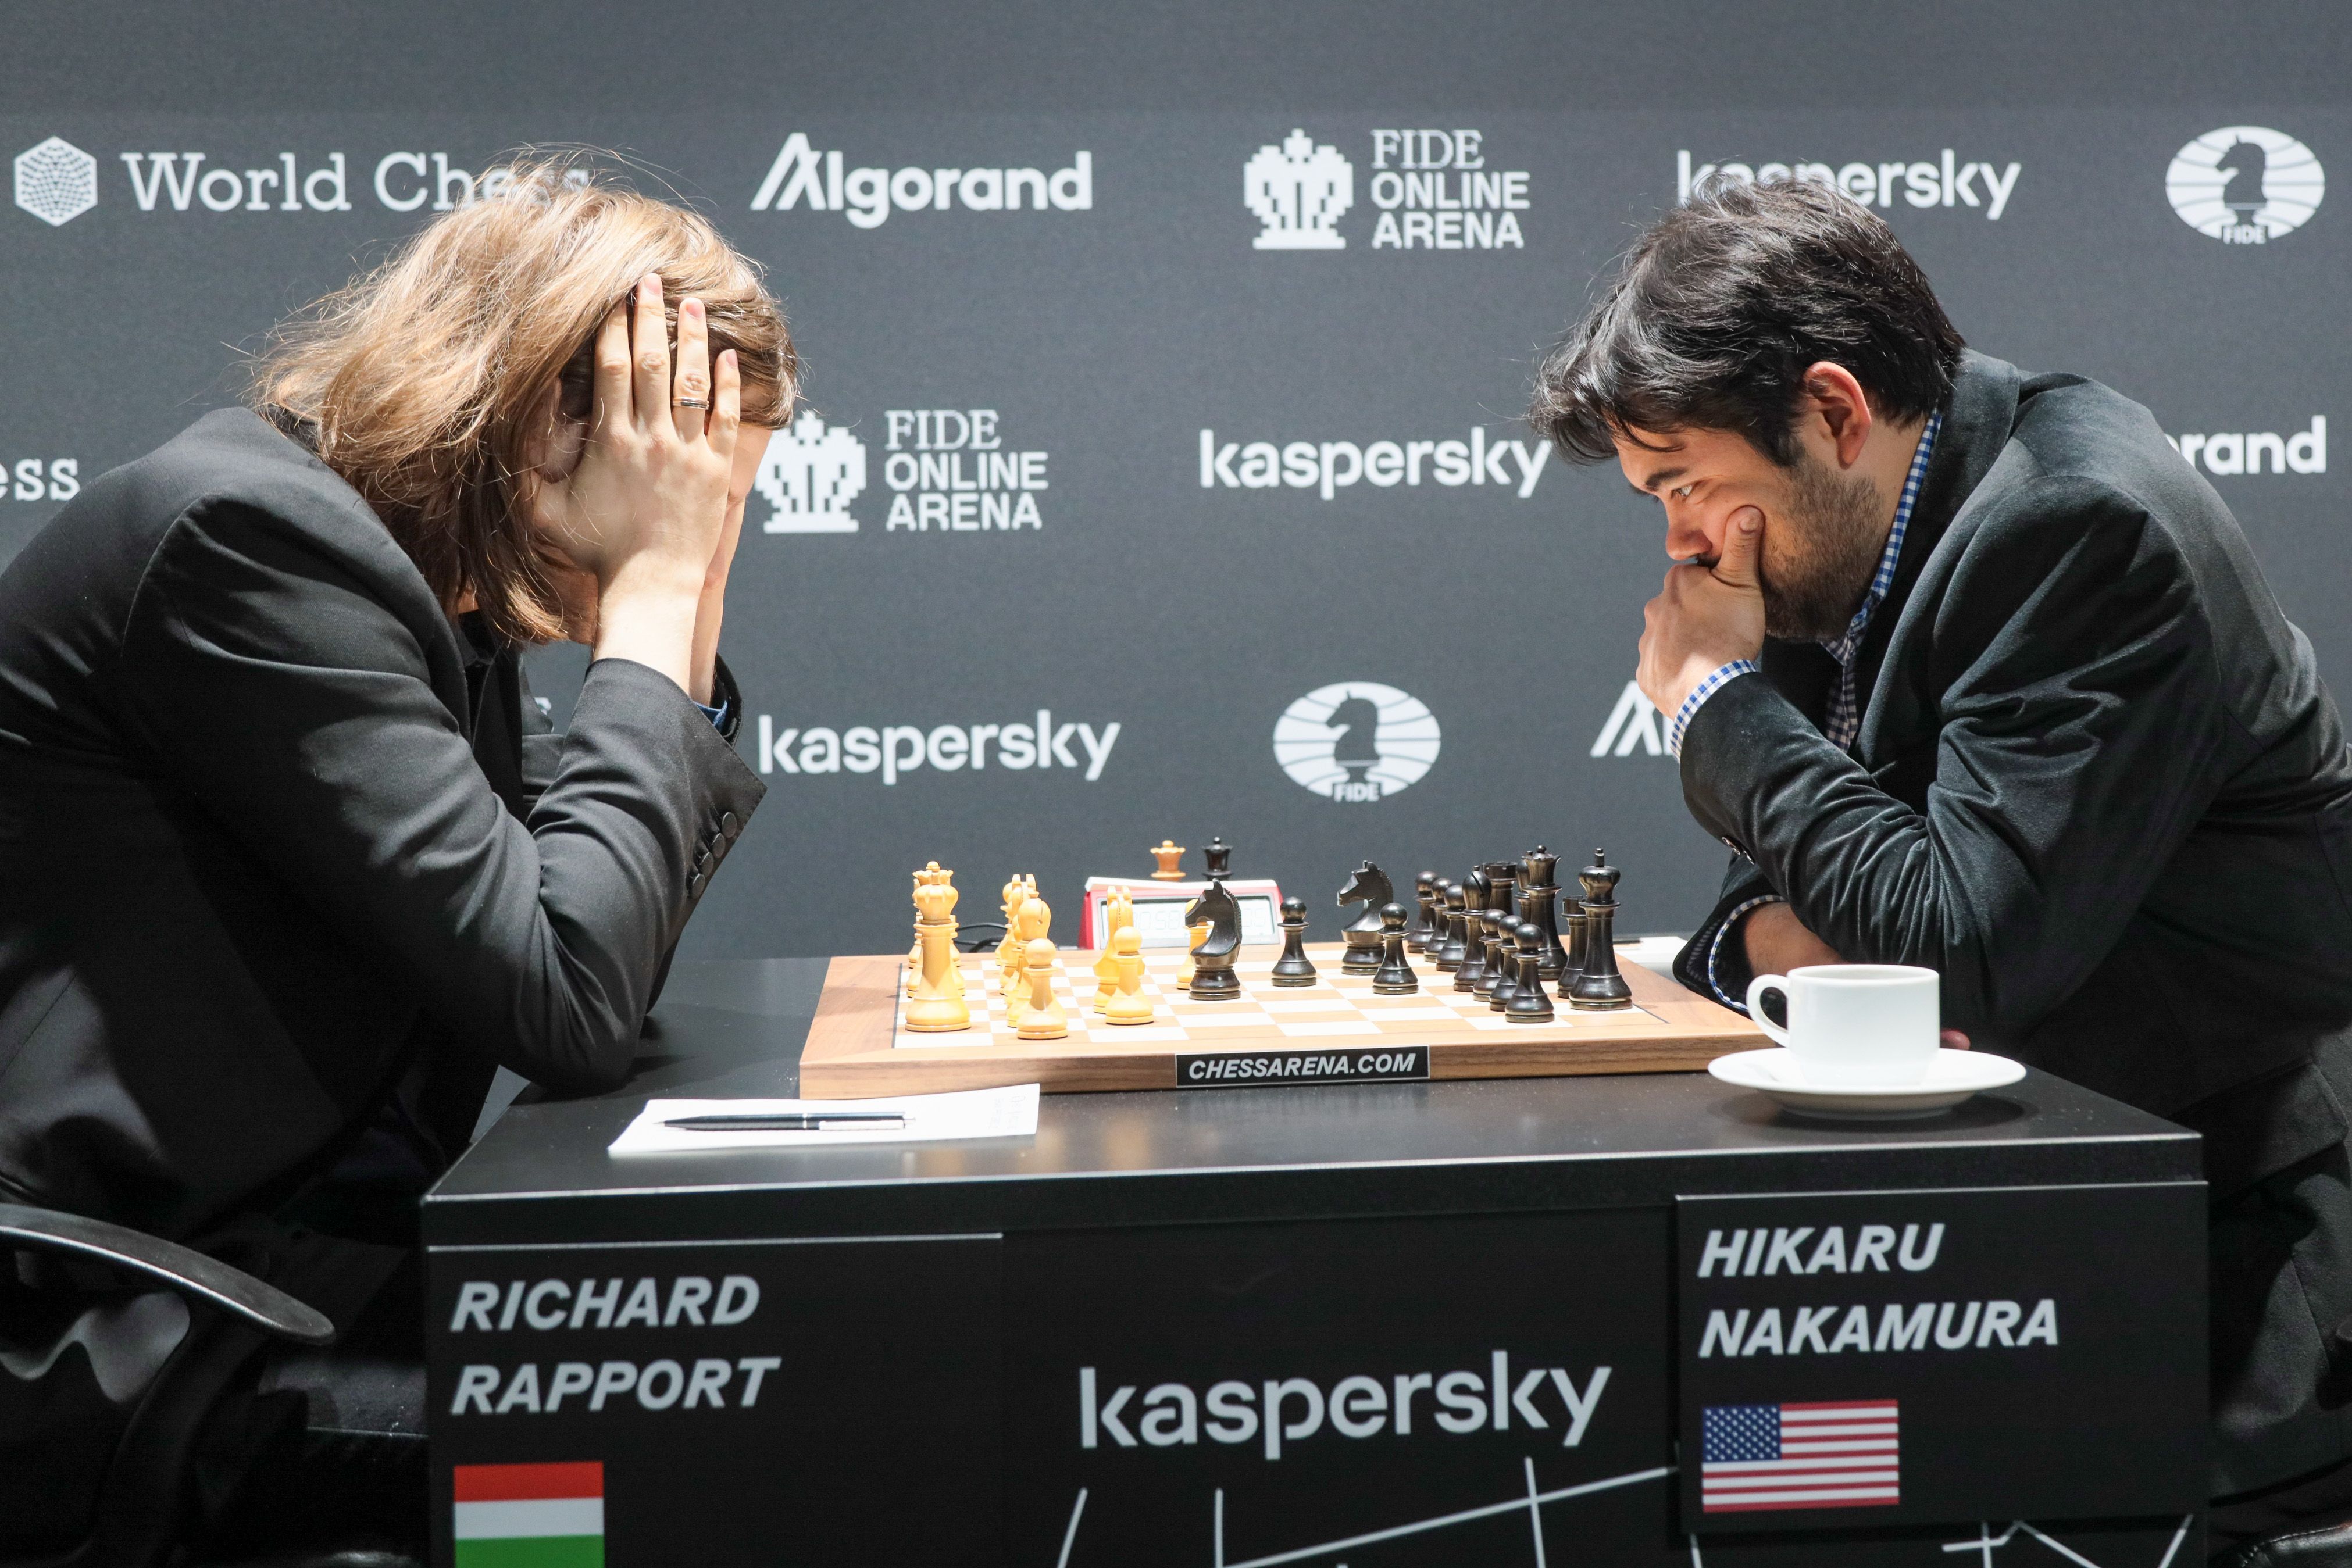 Aronian and Nakamura are the first FIDE Grand Prix semifinalists